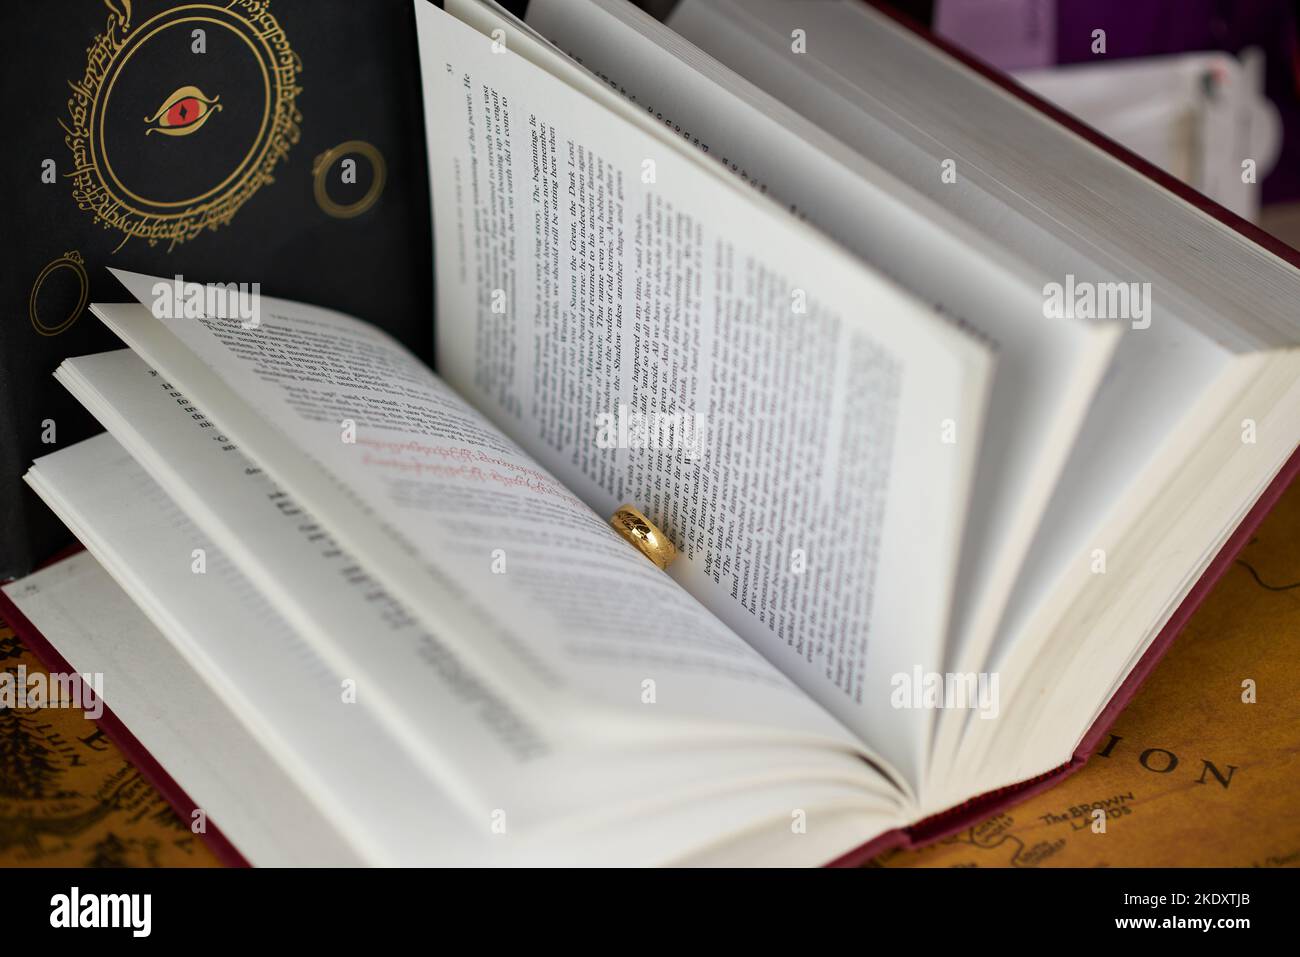 Astrakhan, Russia - 11.09.2022: Golden Ring of Power lies between the pages of the The Lord of the Rings book Stock Photo